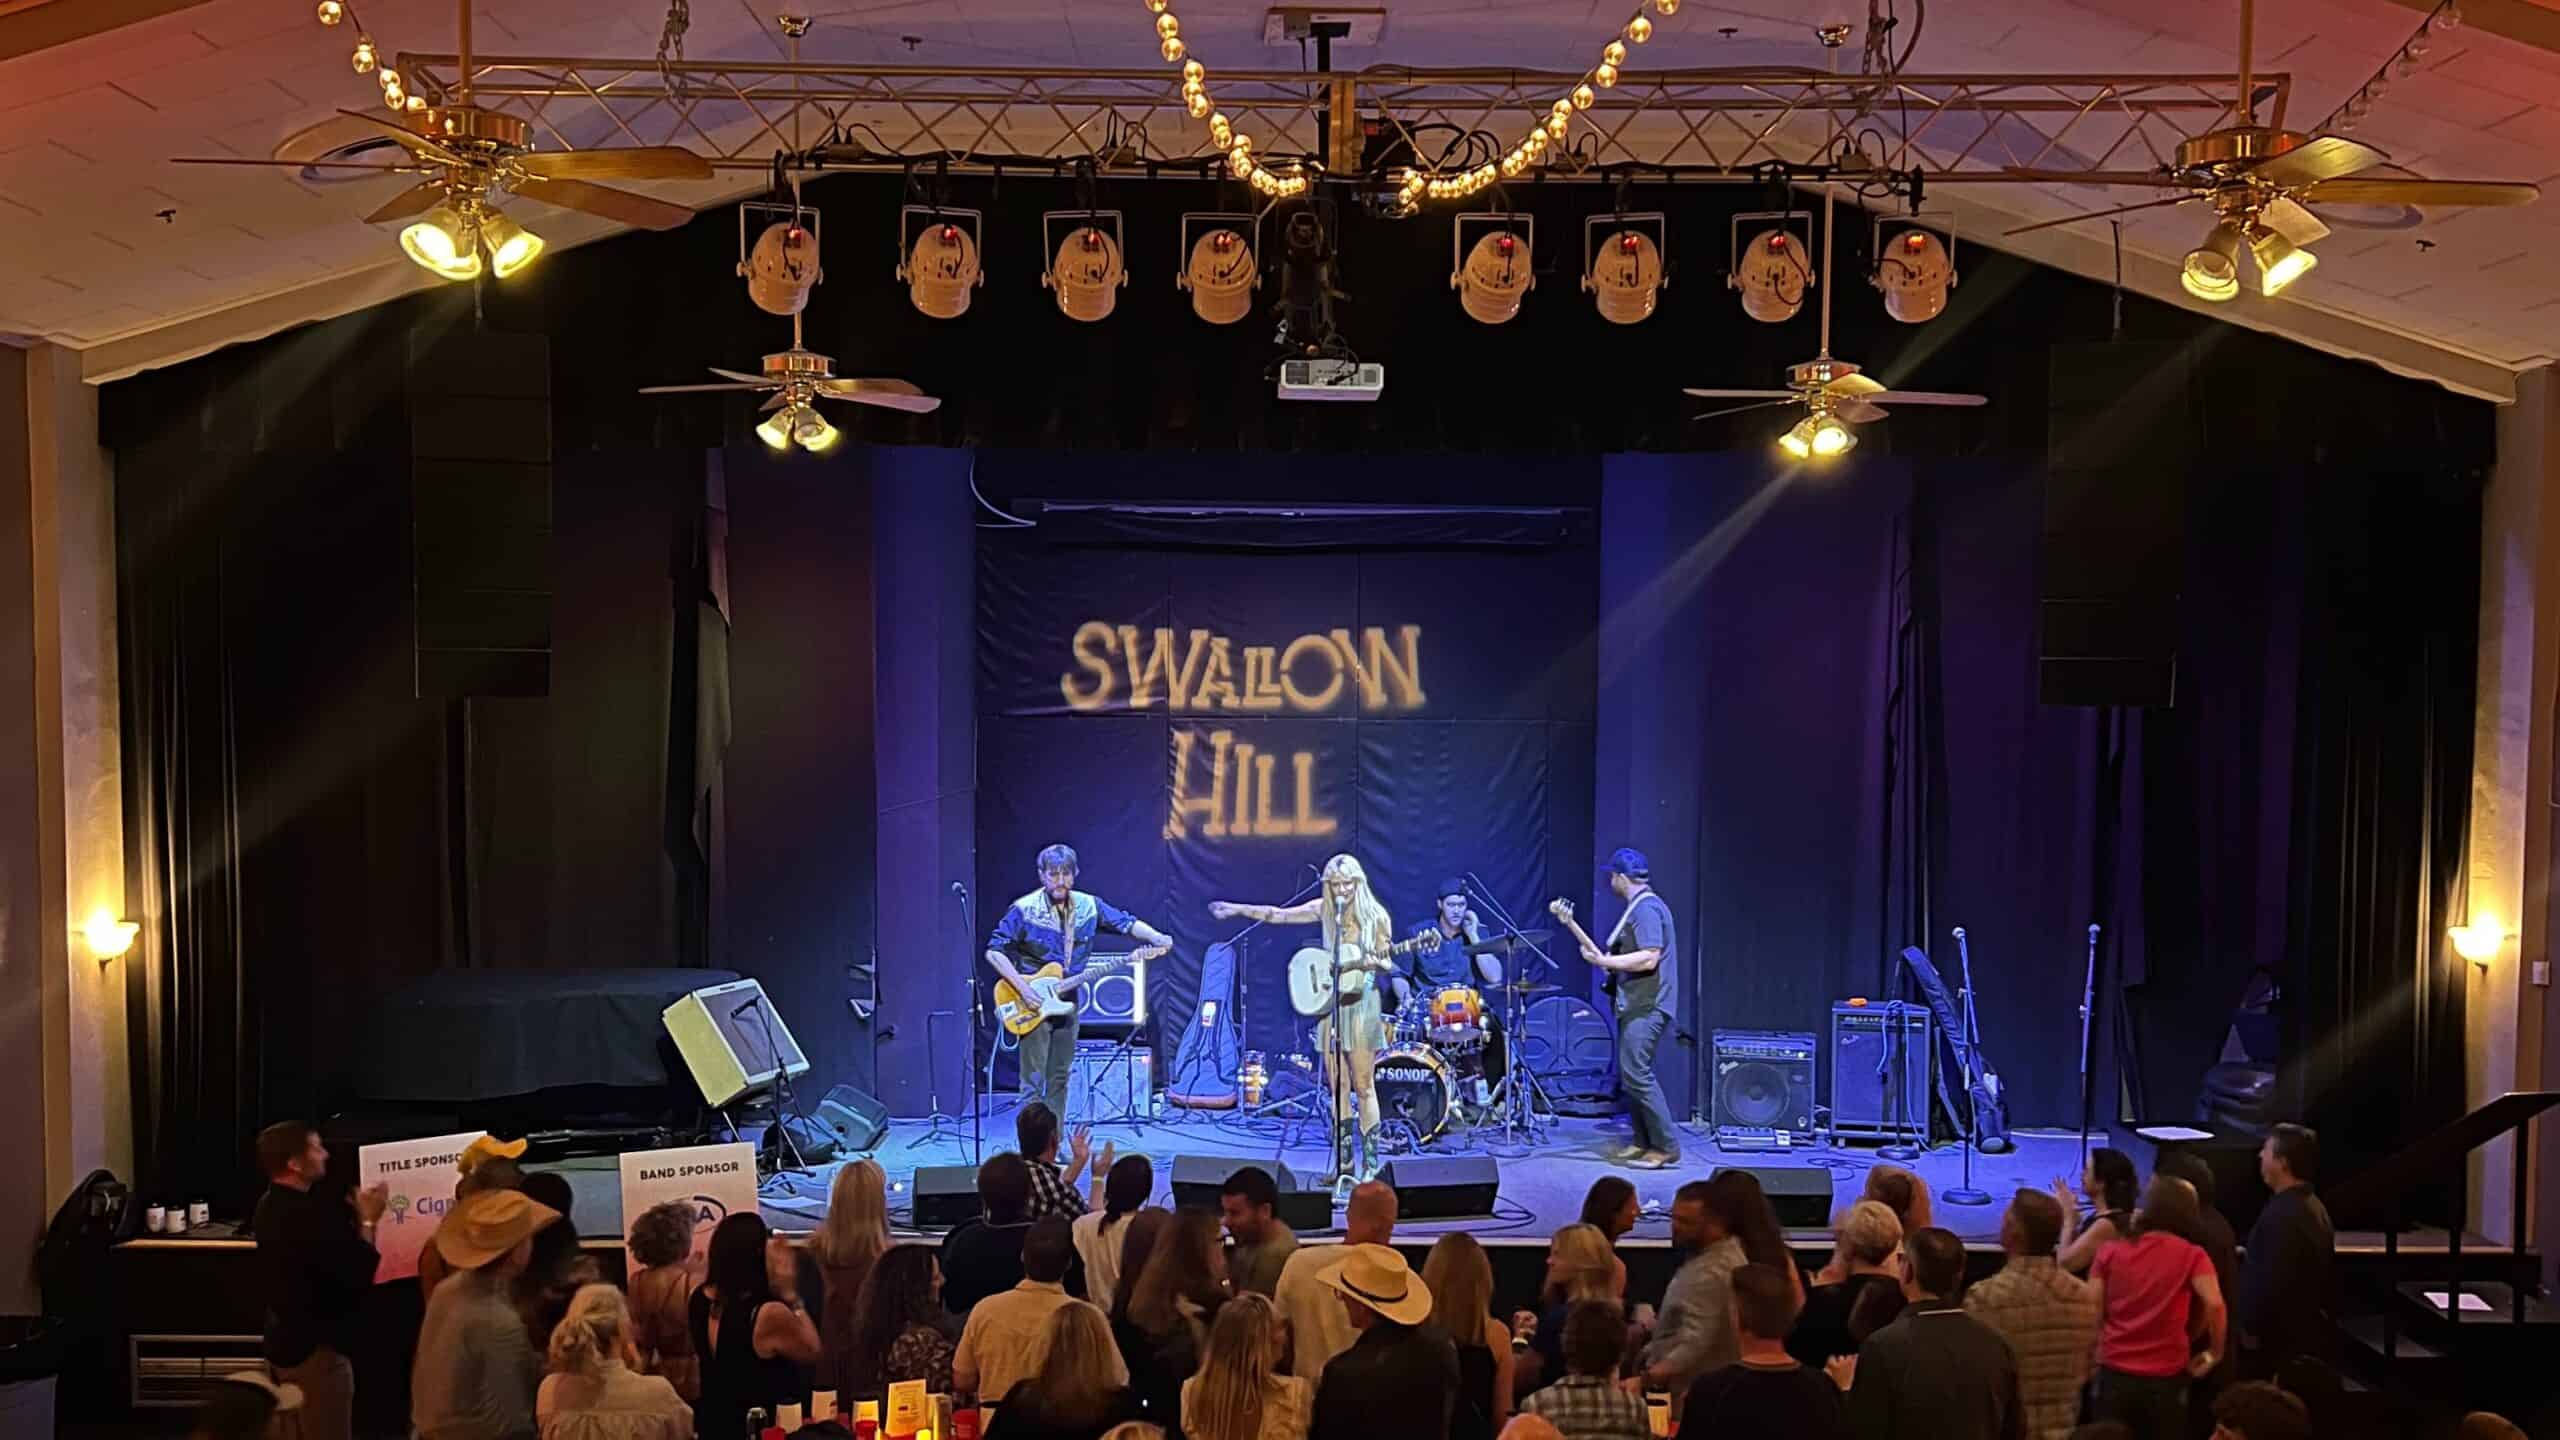 A photo of a crowd in the foreground watching a concert on the stage at Daniels Hall at Swallow Hill Music, with a black curtain behind a band and the words "Swallow Hill" projected upon the curtain.